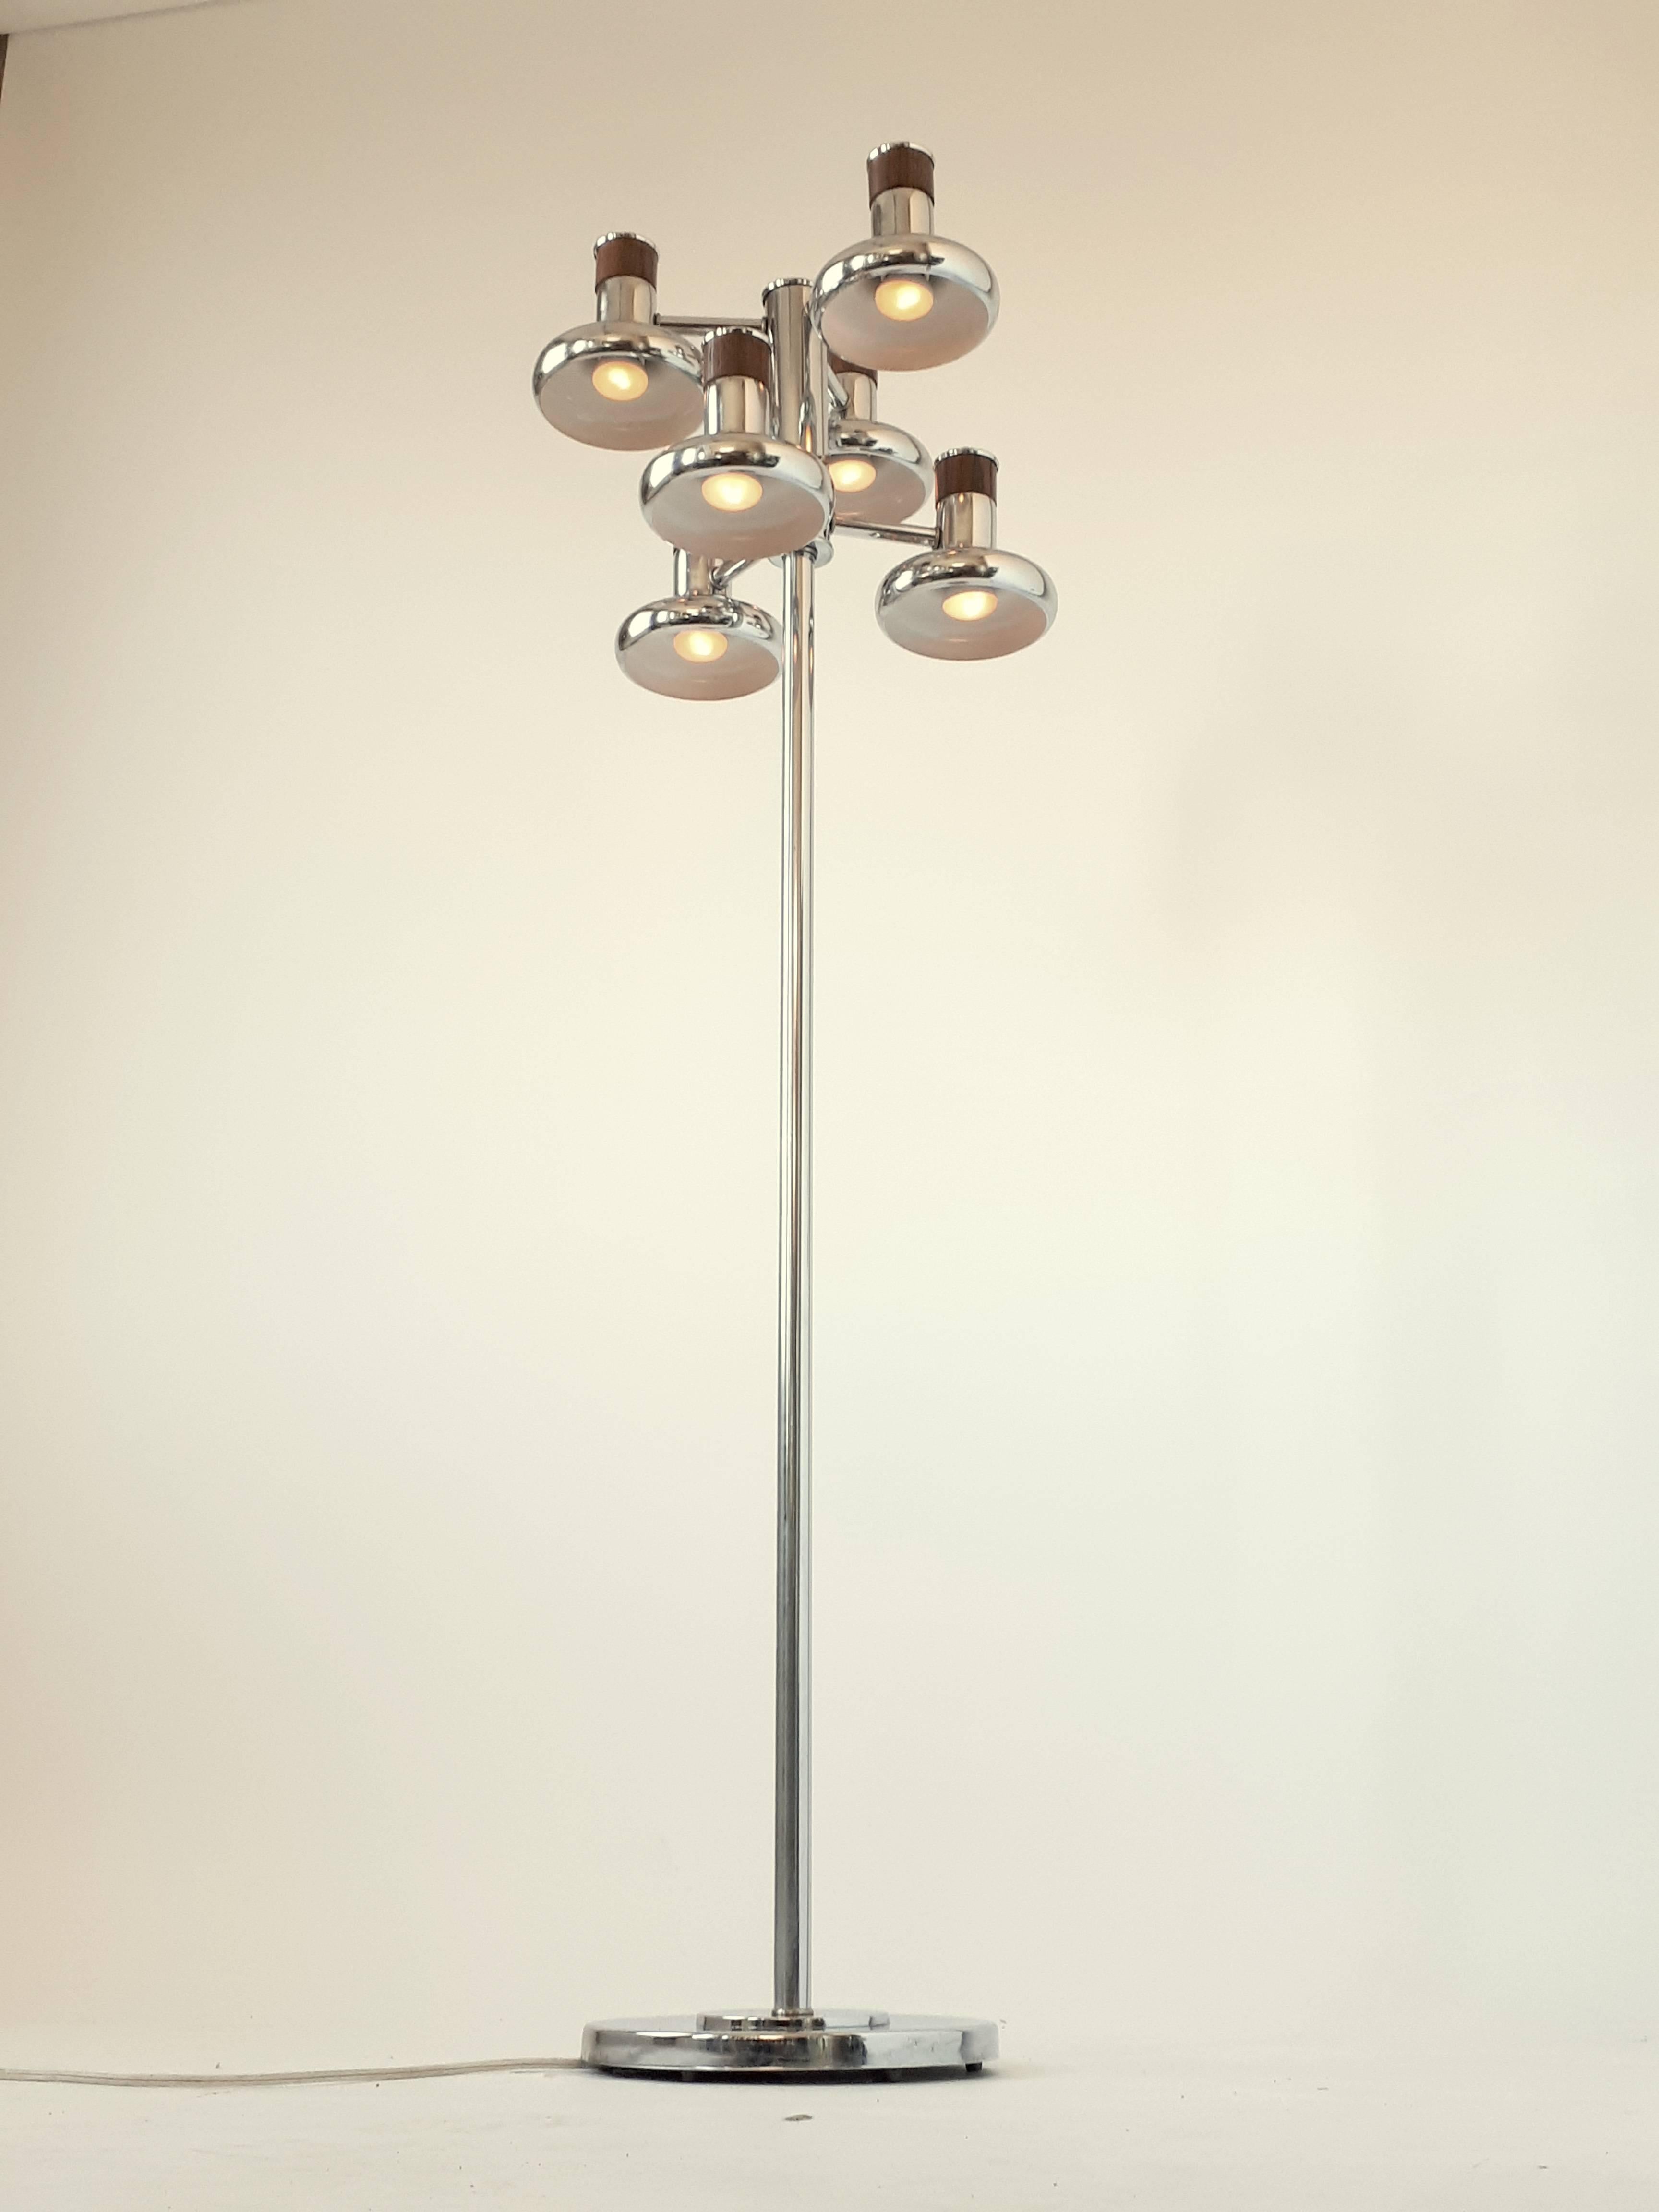 Shade are in the manners of Fog & Mørup with their Optima series. 

Deep 1970 chrome shade with walnut inserts. 

Each head measure 6 x 6 inches. 

Rotating on/off switch on lamp. 

Six E26 medium size socket.